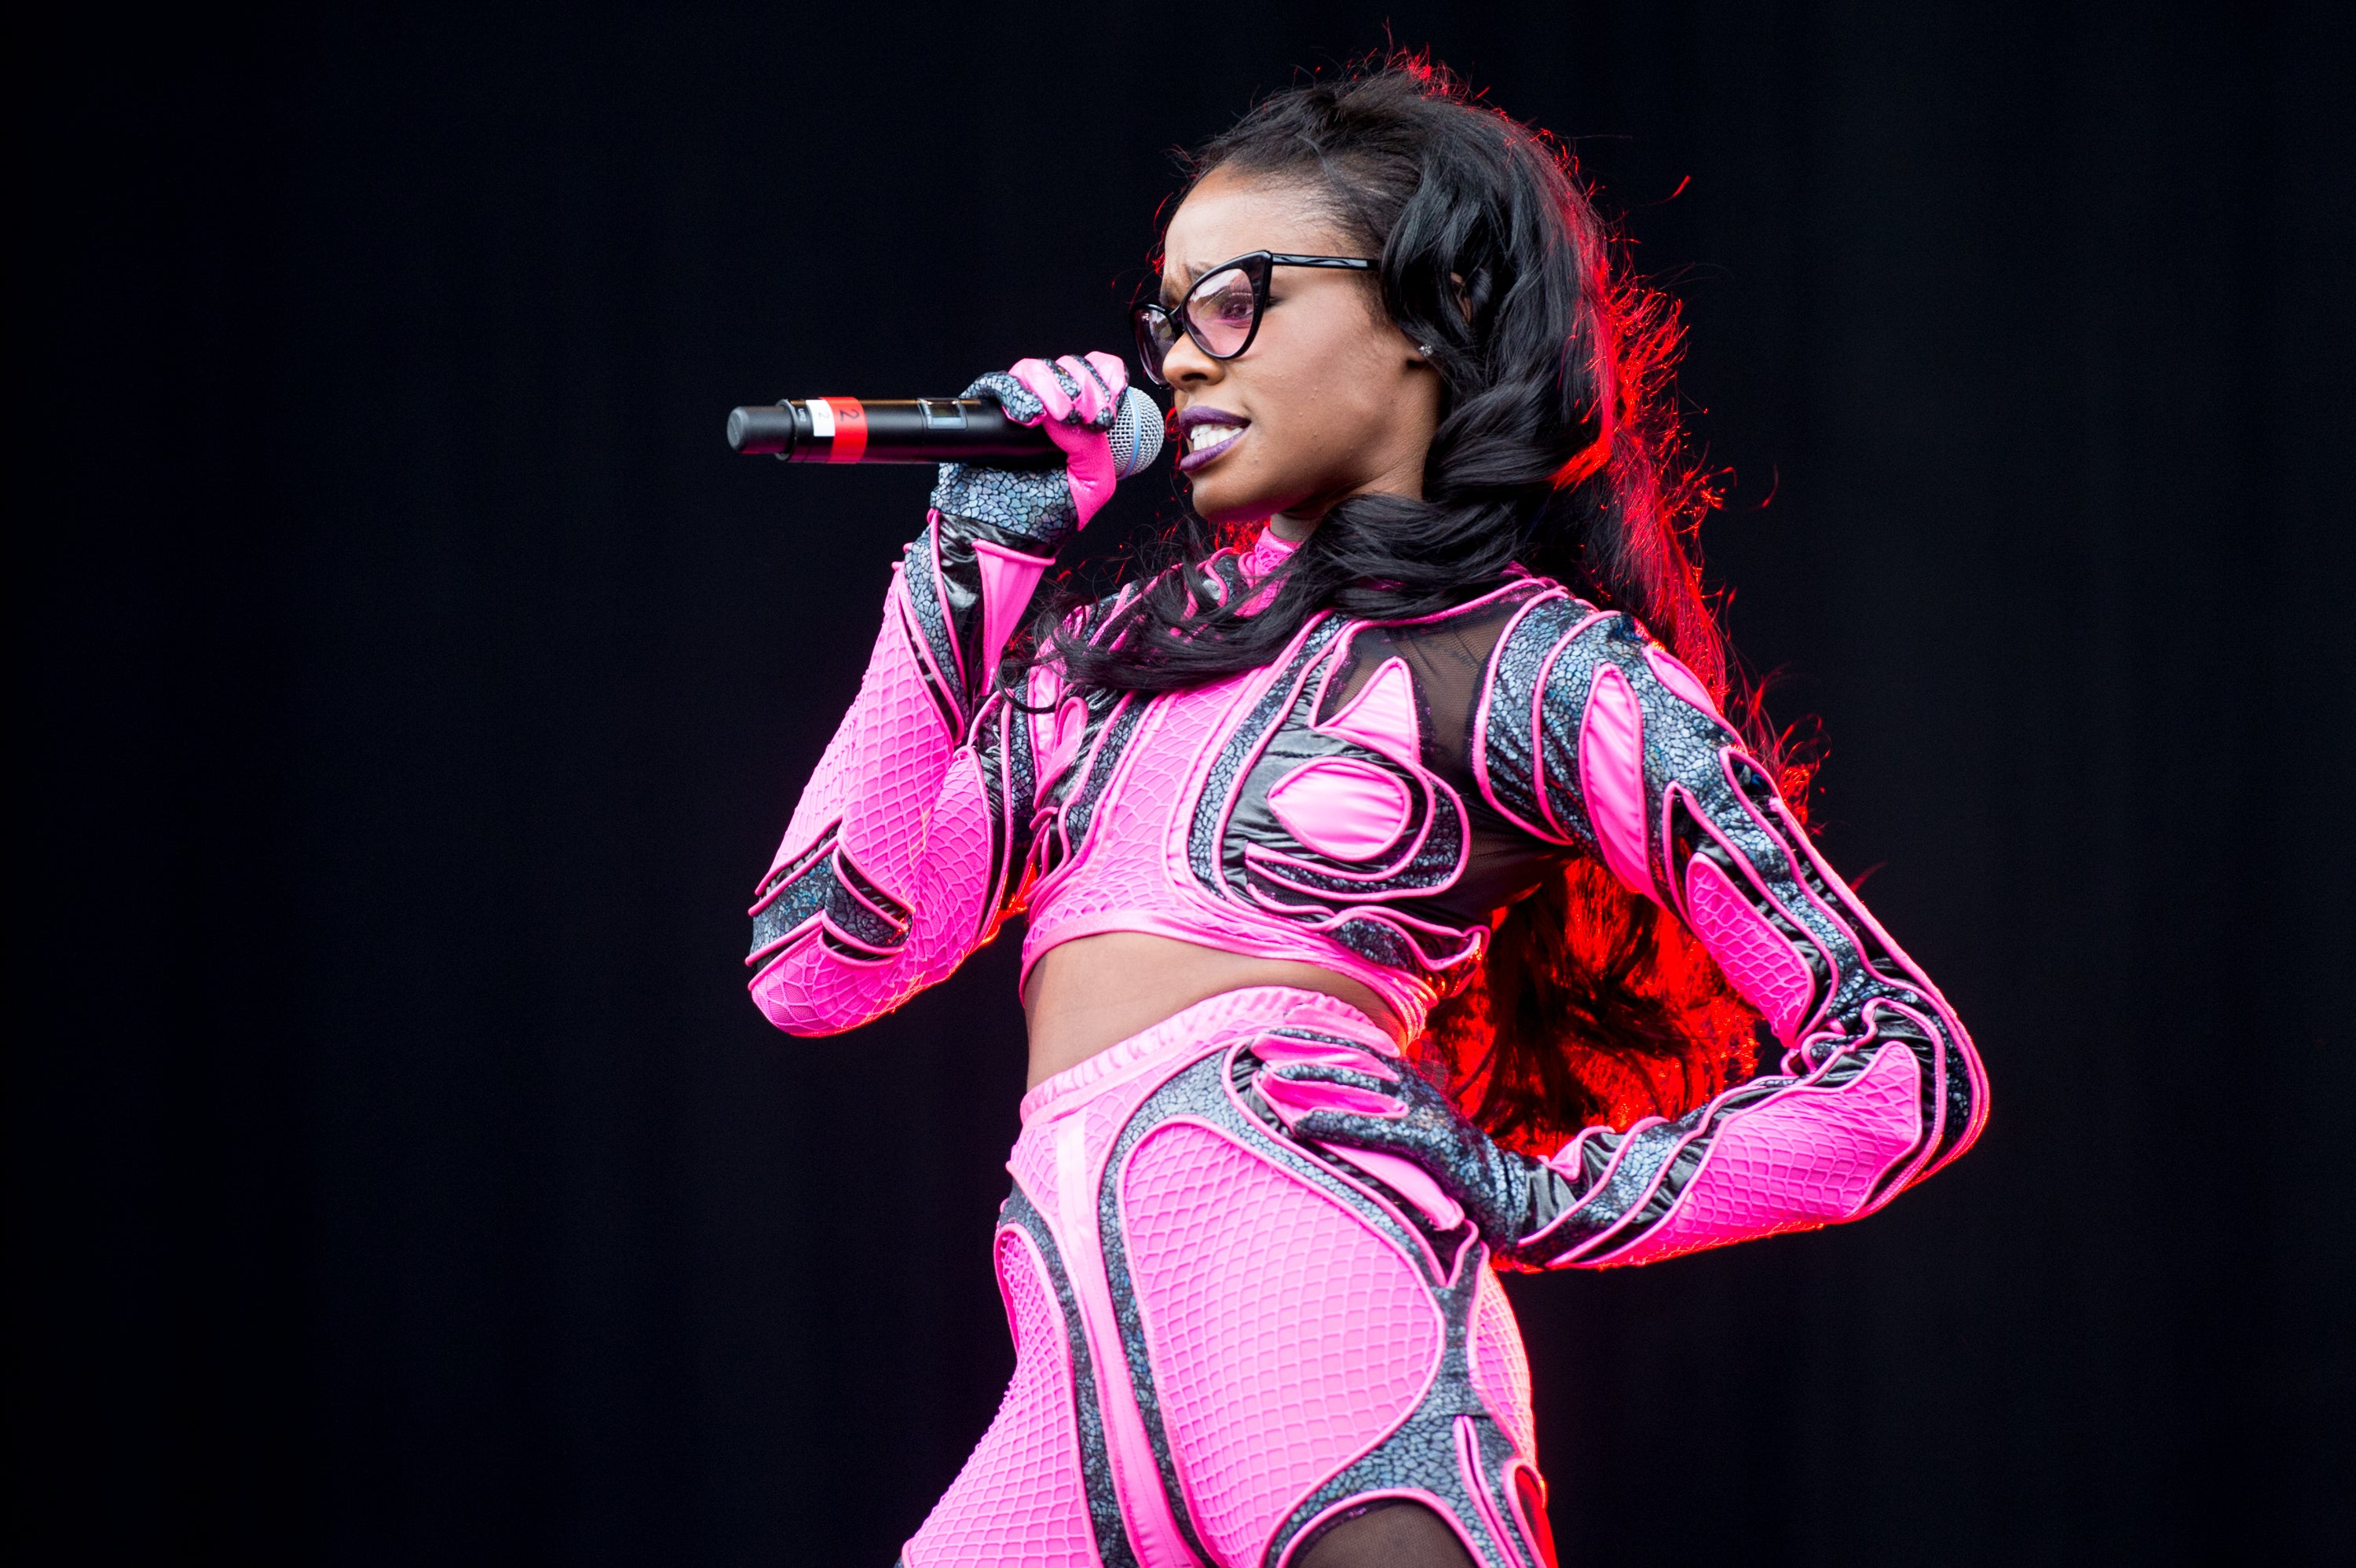 No Surprise Here: Azealia Banks Would Love To Perform At Trump's Inauguration